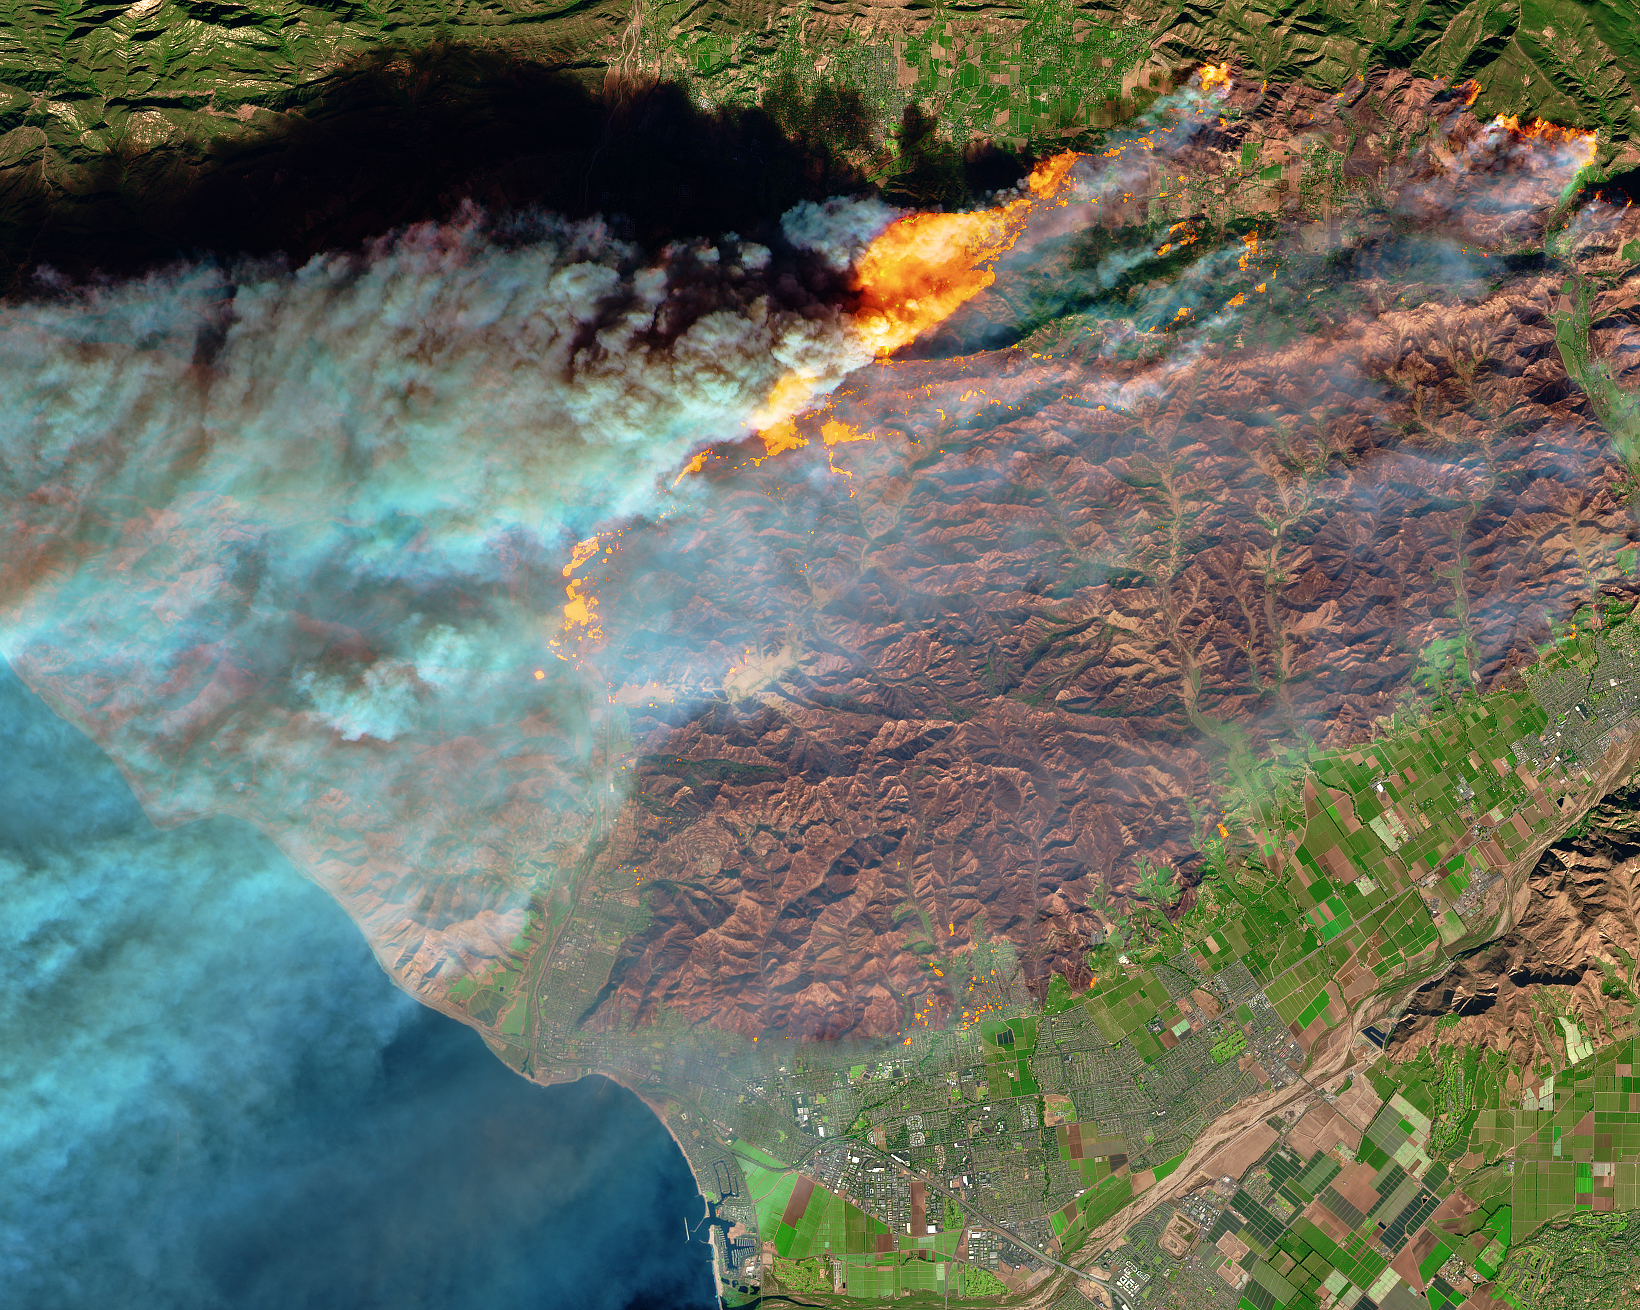 On Dec. 5, 2017, the Multi Spectral Imager (MSI) on the European Space Agency’s Sentinel-2 satellite captured the data for a false-color image of the burn scar in Ventura County, California. Active fires appear orange; the burn scar is brown. Unburned vegetation is green; developed areas are gray. The Sentinel-2 image is based on observations of visible, shortwave infrared, and near infrared light.The fires mainly affected a forested, hilly area north of Ventura, but flames have encroached into the northern edge of the city. On December 6, 2017, Cal Fire estimated that at least 12,000 structures were threatened by fire.Powerful Santa Ana winds fanned the flames. Forecasters with the Los Angeles office of the National Weather Service warned that the region is in the midst of its strongest and longest Santa Ana wind event of the year. They issued red flag warnings for Los Angles and Ventura counties through December 8, noting that isolated wind gusts of 80 miles (130 kilometers) per hour are possible.A prolonged spell of dry weather also primed the area for major fires. This week’s winds follow nine of the driest consecutive months in Southern California history, NASA Jet Propulsion Laboratory climatologist Bill Patzert told the Los Angeles Times. “Pile that onto the long drought of the past decade and a half, [and] we are in apocalyptic conditions,” he said.Annotated images: NASA Earth ObservatoryNASA Earth Observatory images by Joshua Stevens using modified Copernicus Sentinel data (2017) processed by the European Space Agency